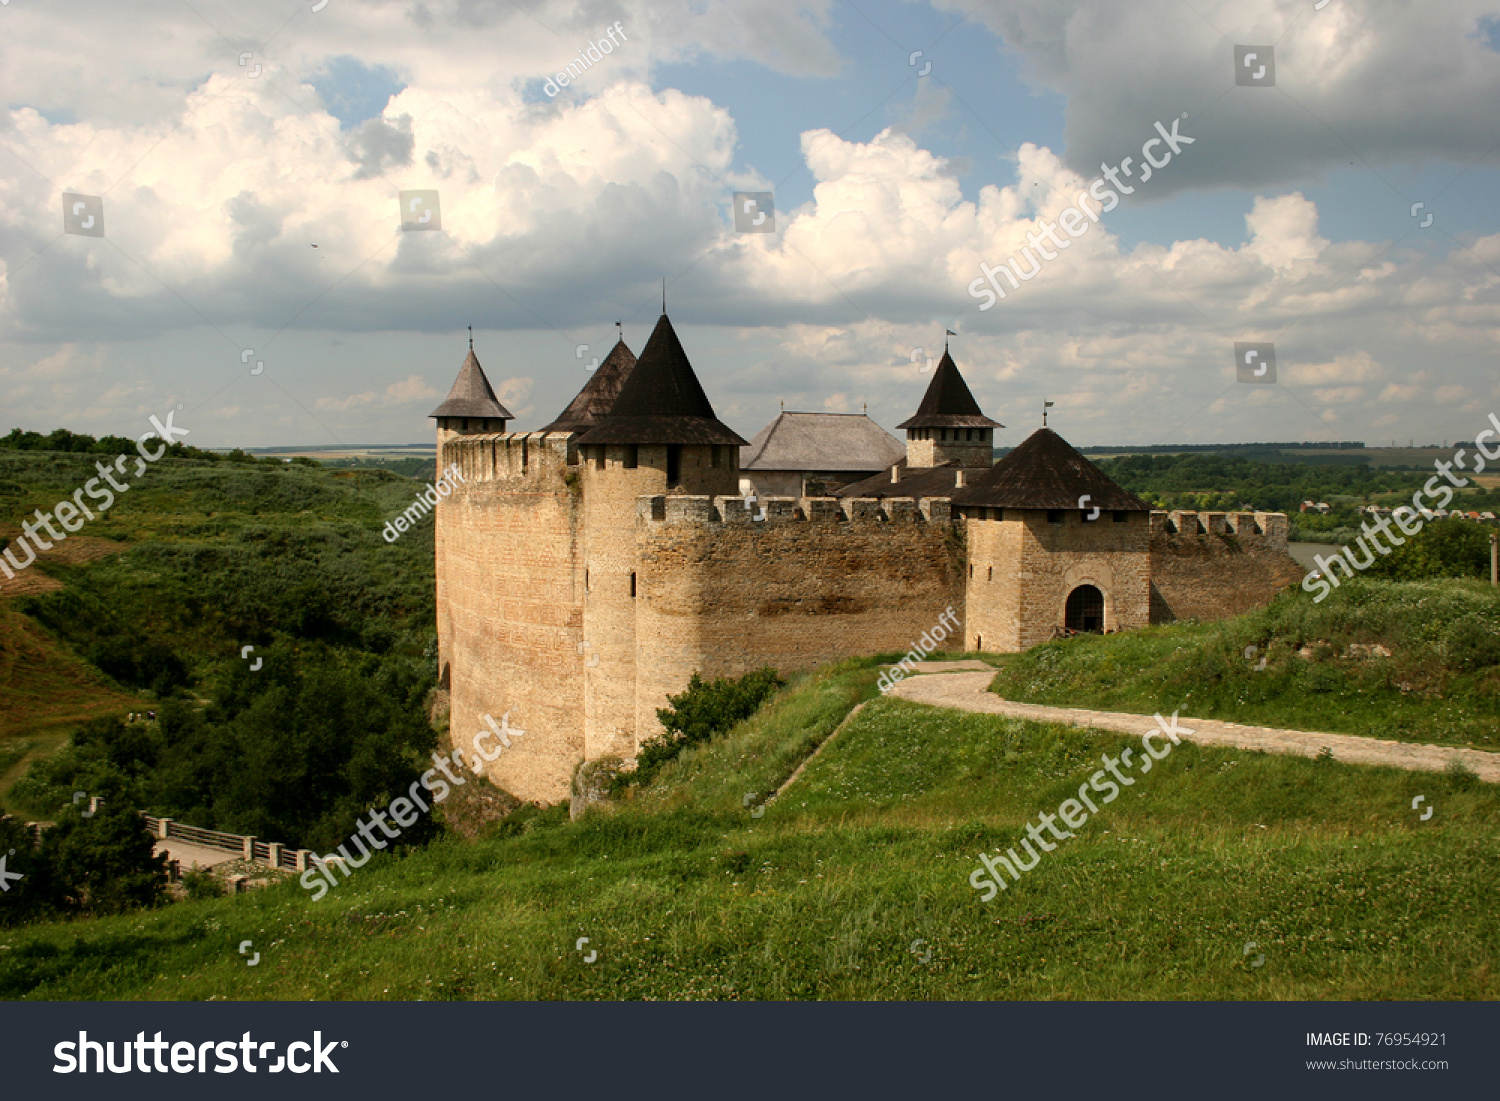 Ancient fortress in the city of Hotin, on the bank of Dnestr, Ukraine. #76954921